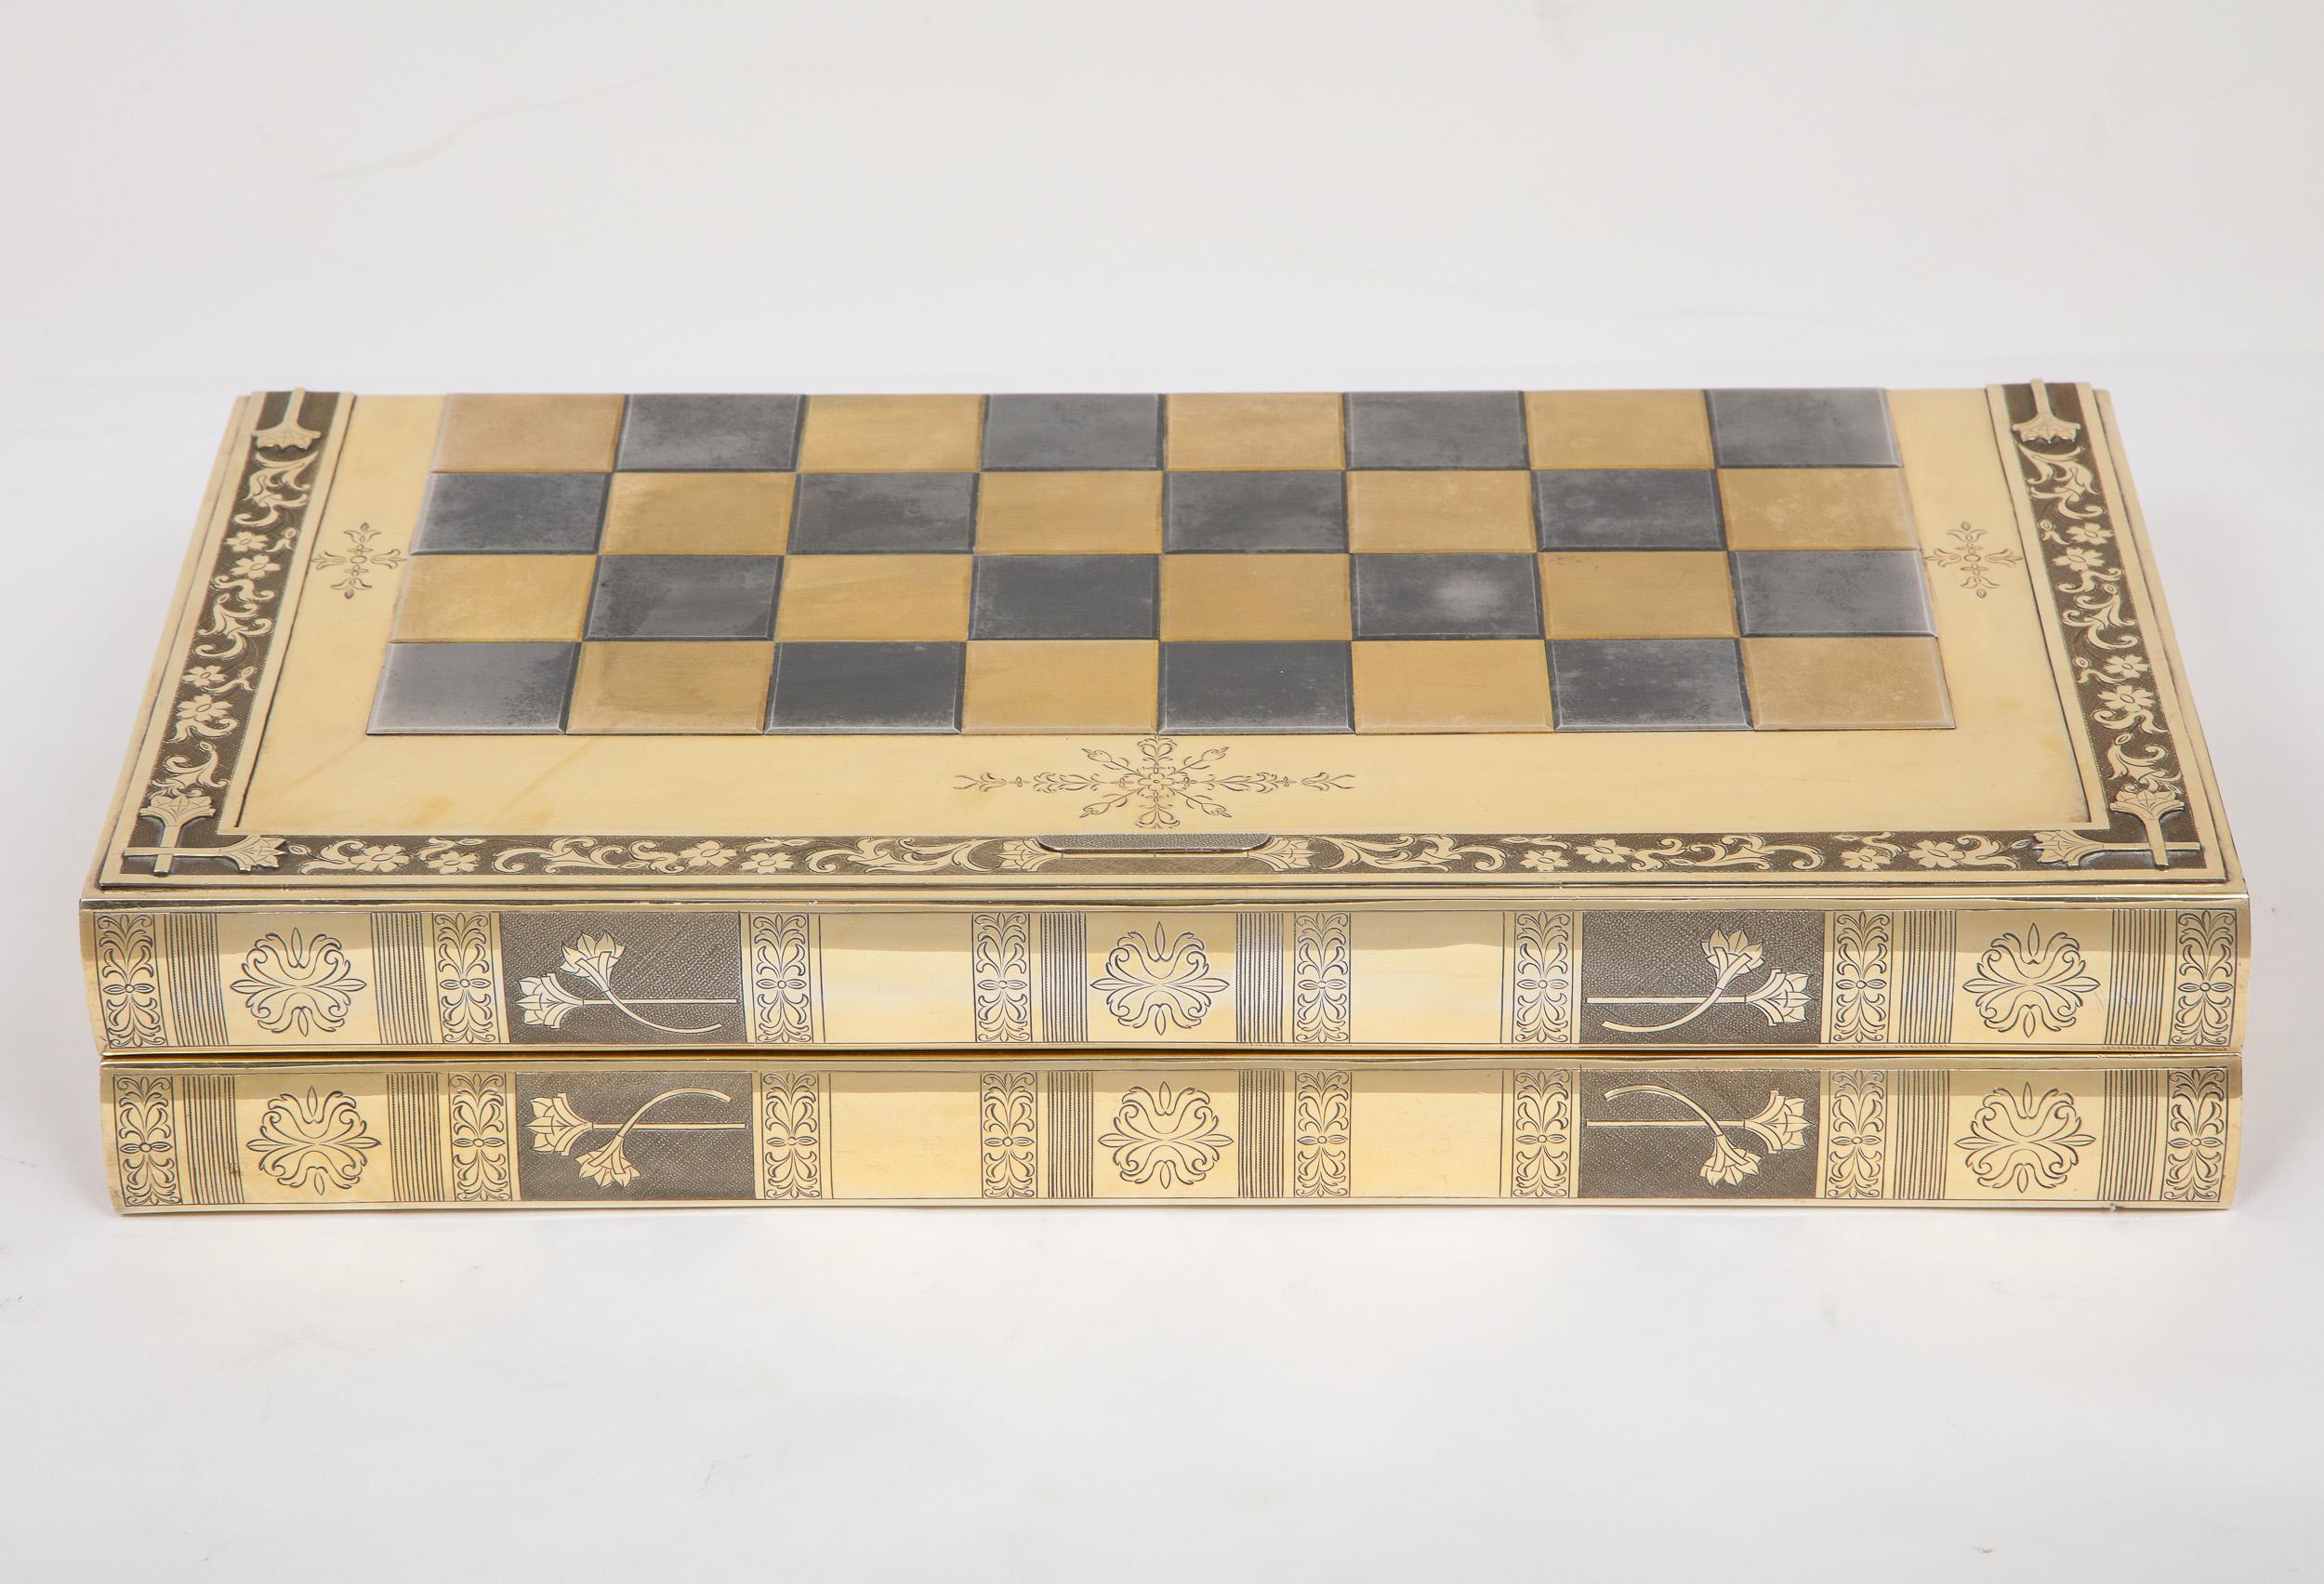 Rare English silver-gilt book-form chess and backgammon game board, circa 1976.

This exceptional and rare solid silver chess board converts into a backgammon board and can also be placed in a bookshelf to add more opulence. (3 in 1).

This was